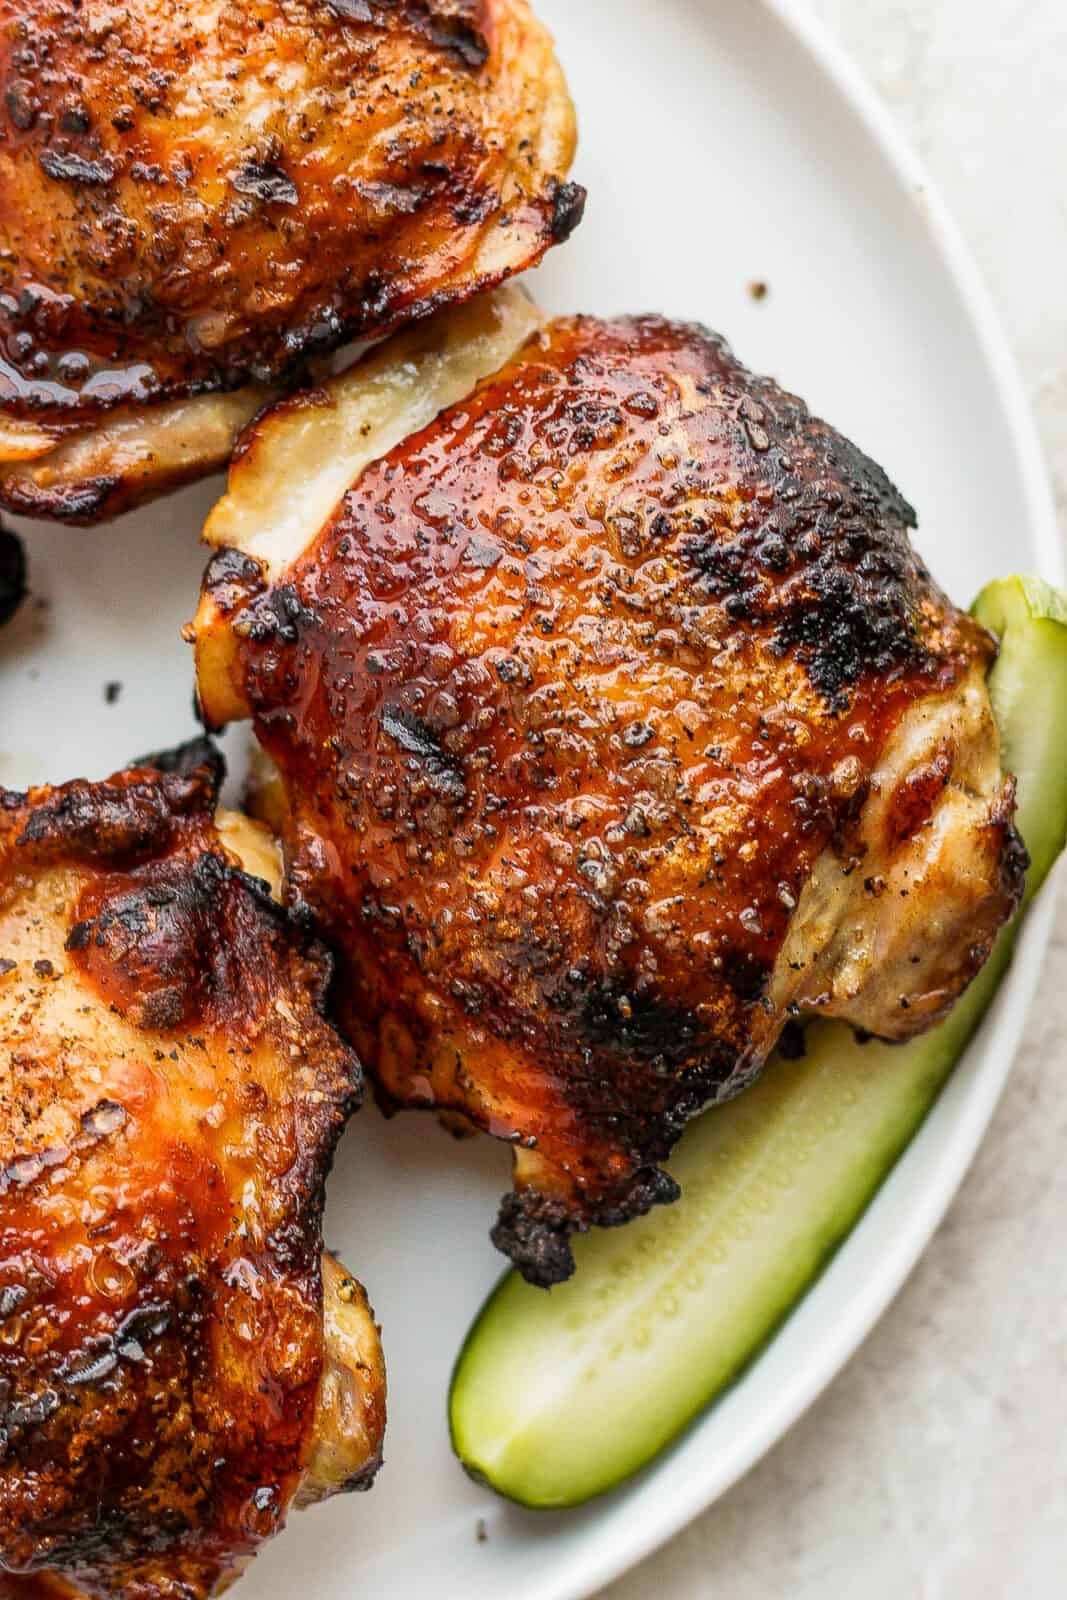 Grilled chicken thighs on a plate.